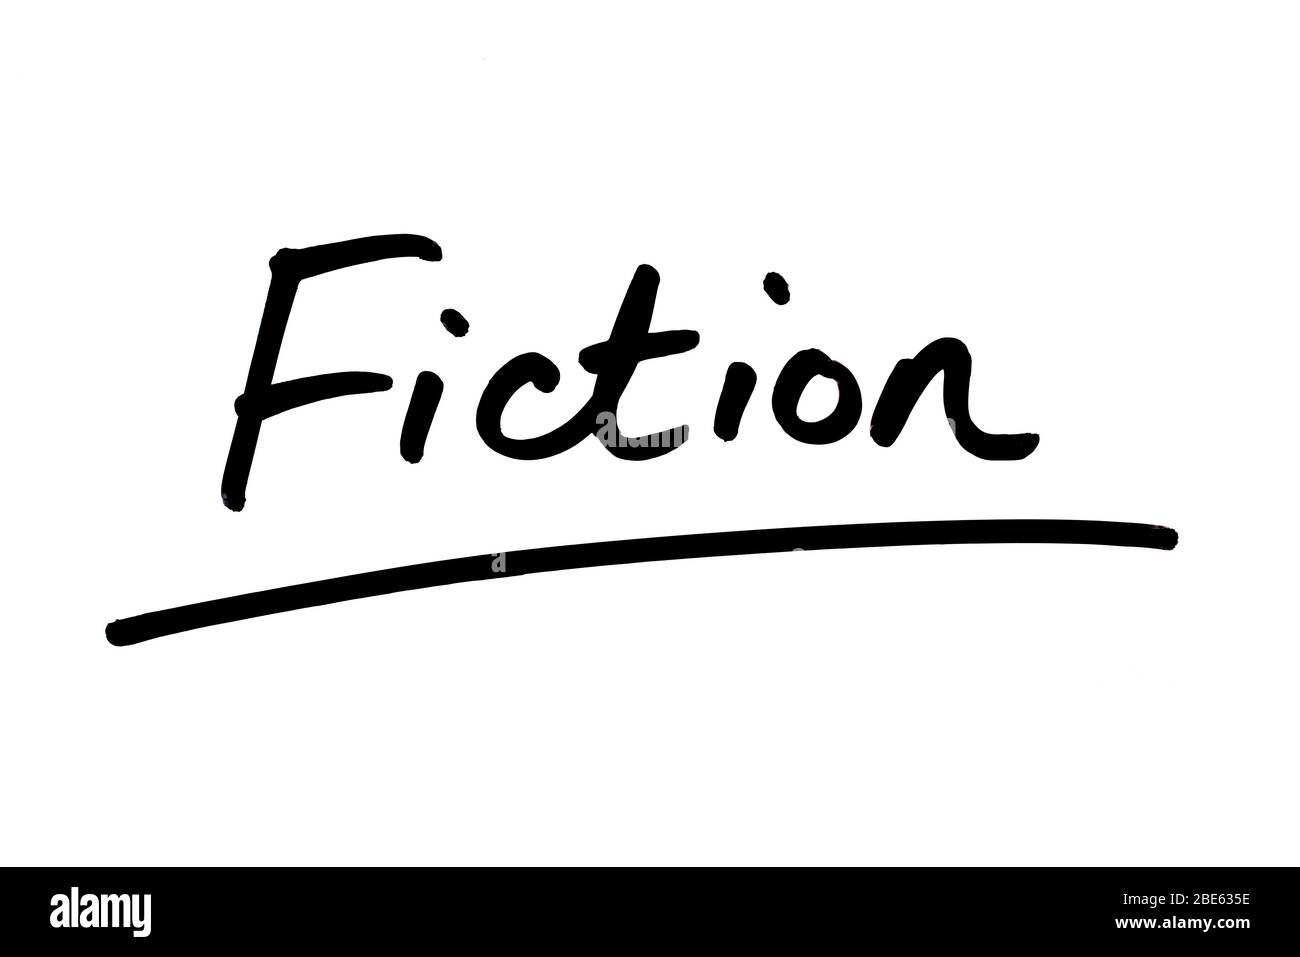 The word Fiction handwritten on a white background. Stock Photo